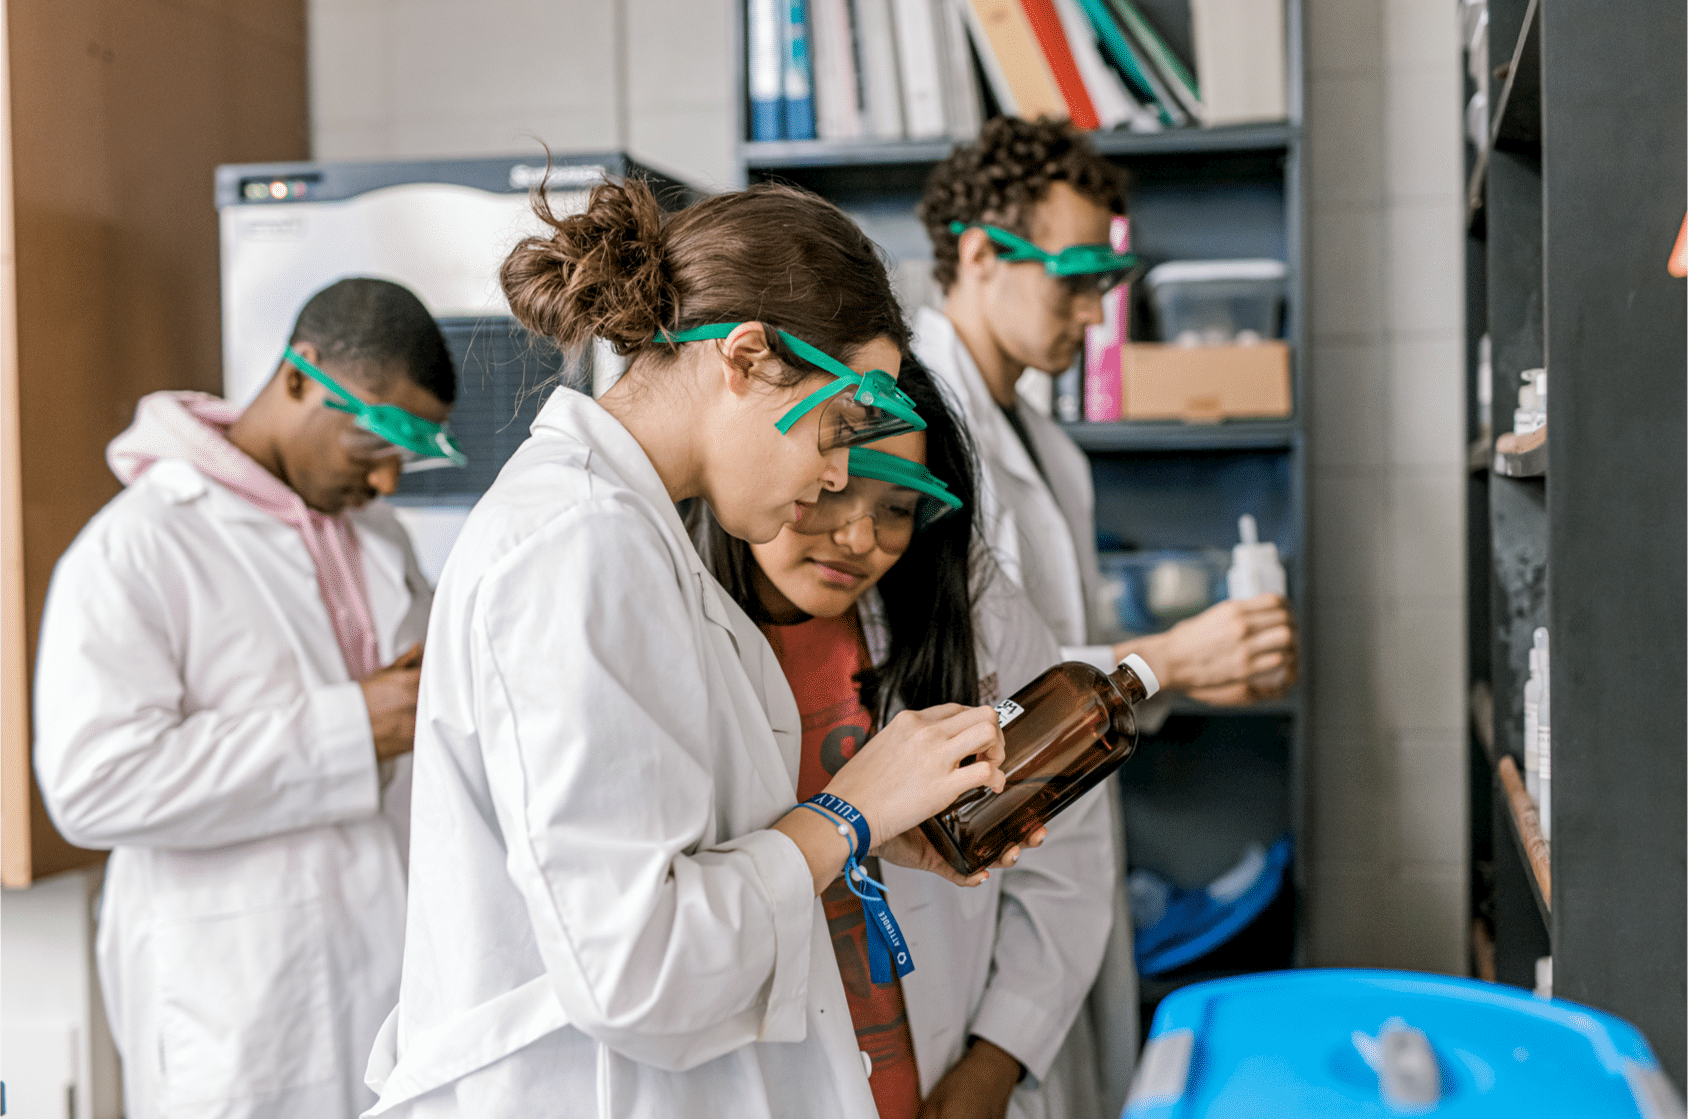 Wearing white lab coats and goggles, two female students lean in close as they read the label of a chemical bottle. Their peers can be seen in the back looking through other chemical bottles for their lab.